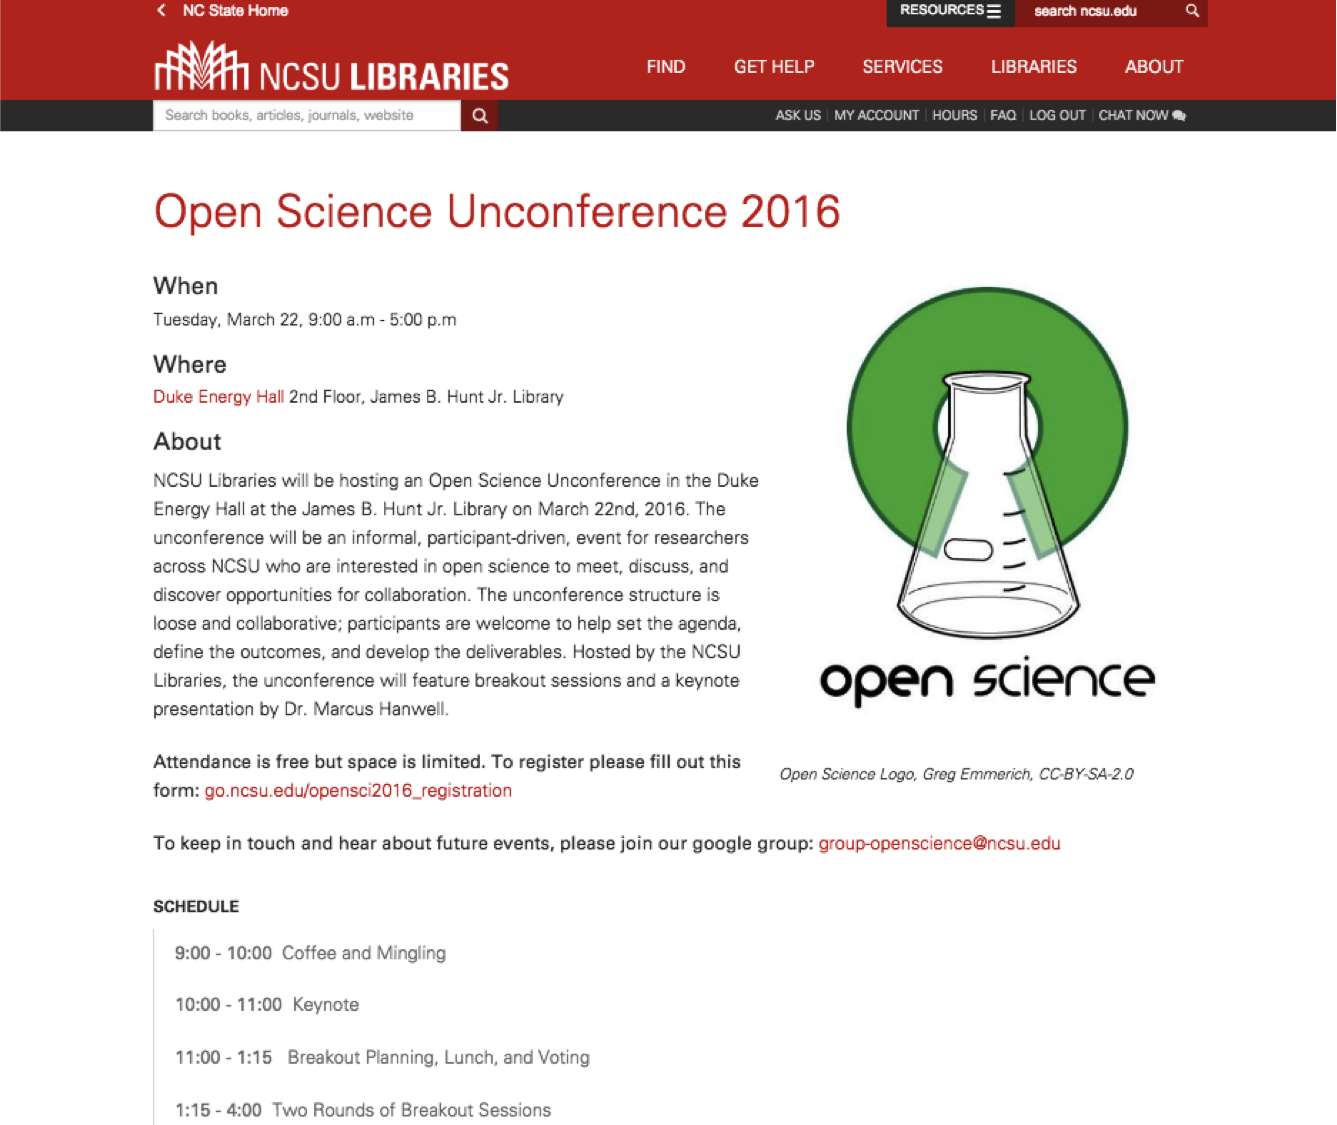 Open Science Unconference